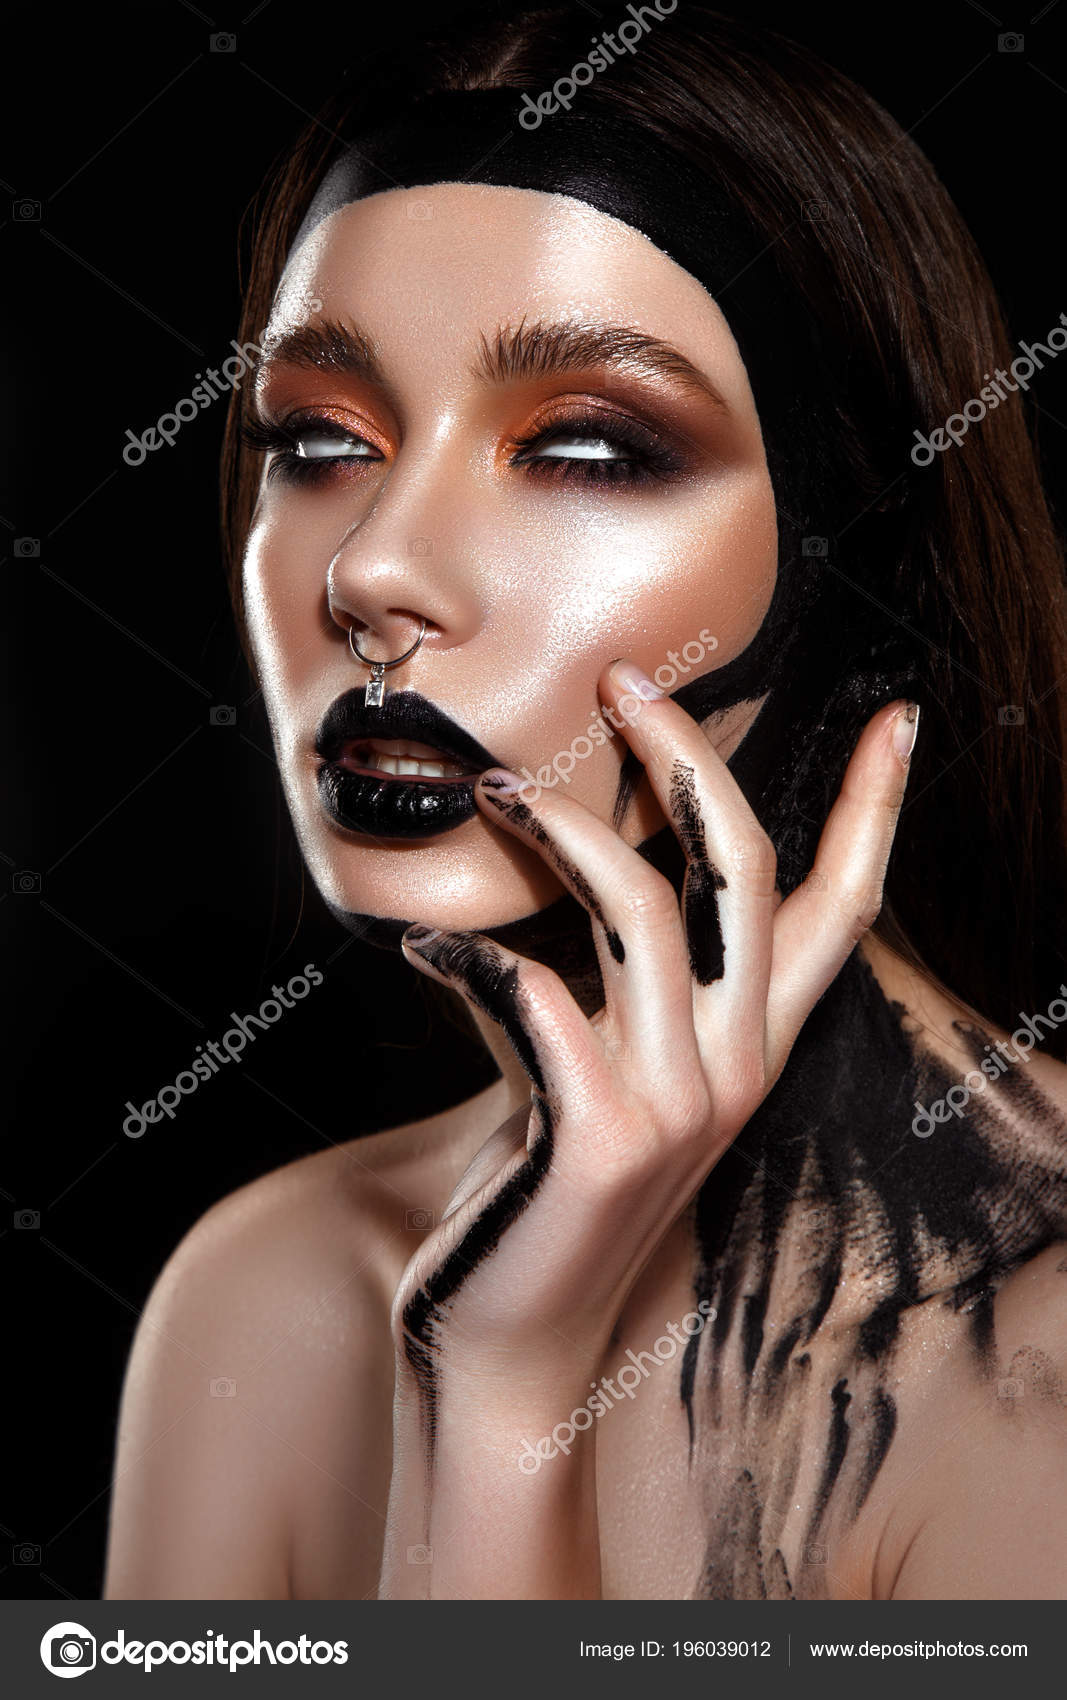 Green Witch Face Paint Ideas Brunette Face Paint Witch Dark Atmosphere Stock Photo C Demidenkoelena 196039012